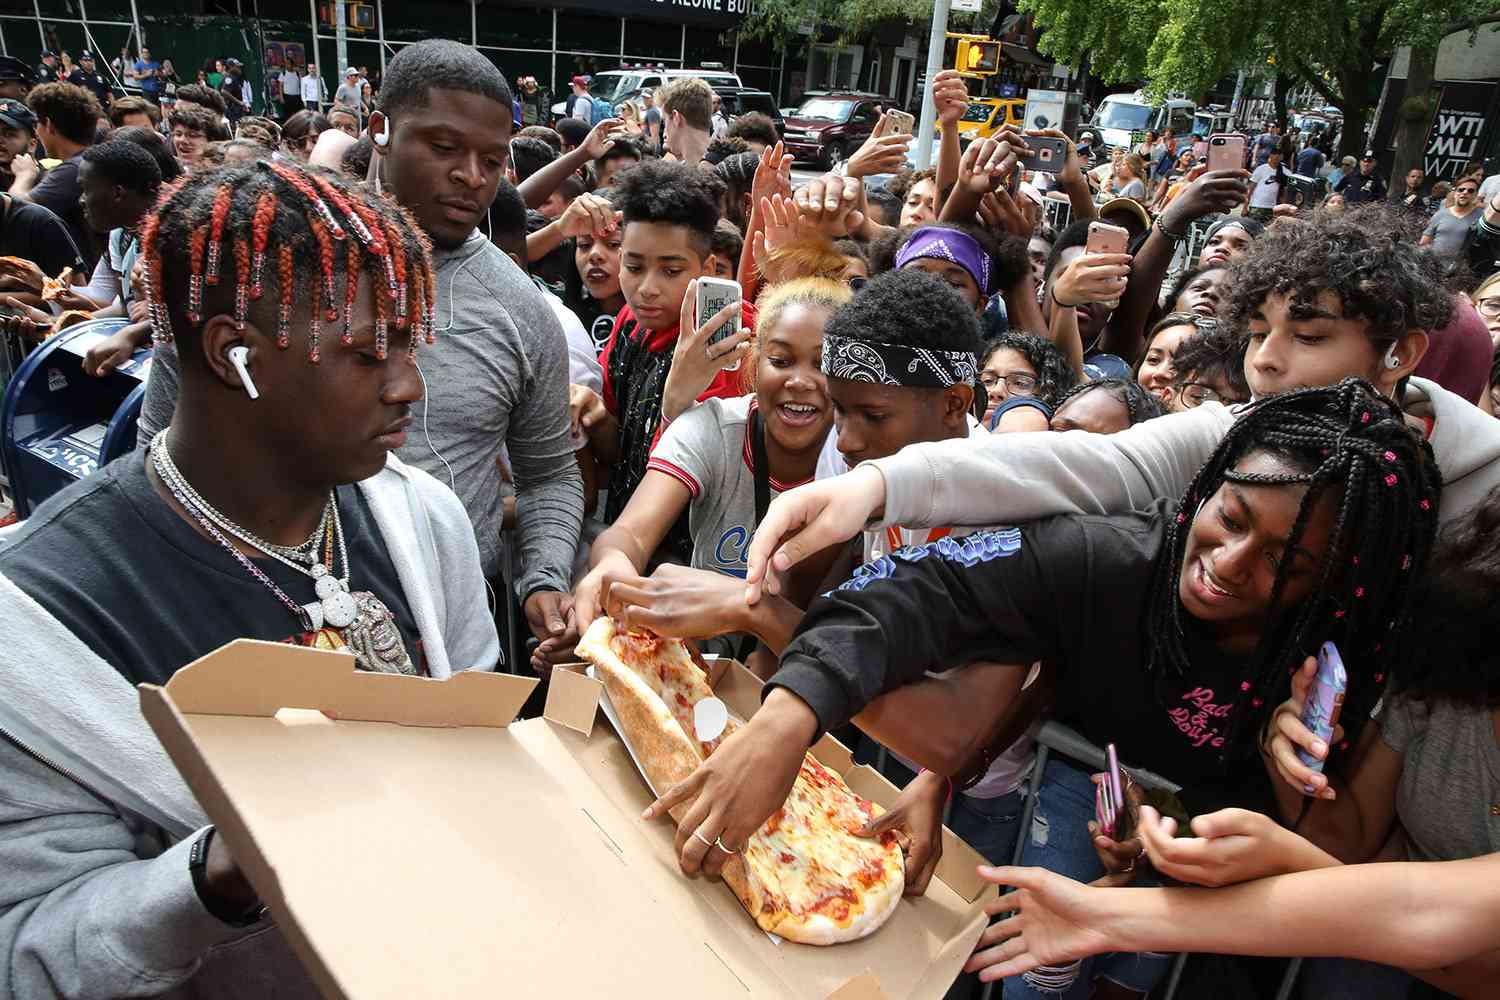 NEW YORK, NY - AUGUST 25: Rapper Lil Yachty gives pizza to a crowd of fans at Yachty's Pizzeria, a pop-up pizzeria at Famous Ben's Pizzeria located on 177 Spring Street on August 25, 2017 in New York City. (Photo by JP Yim/Getty Images)